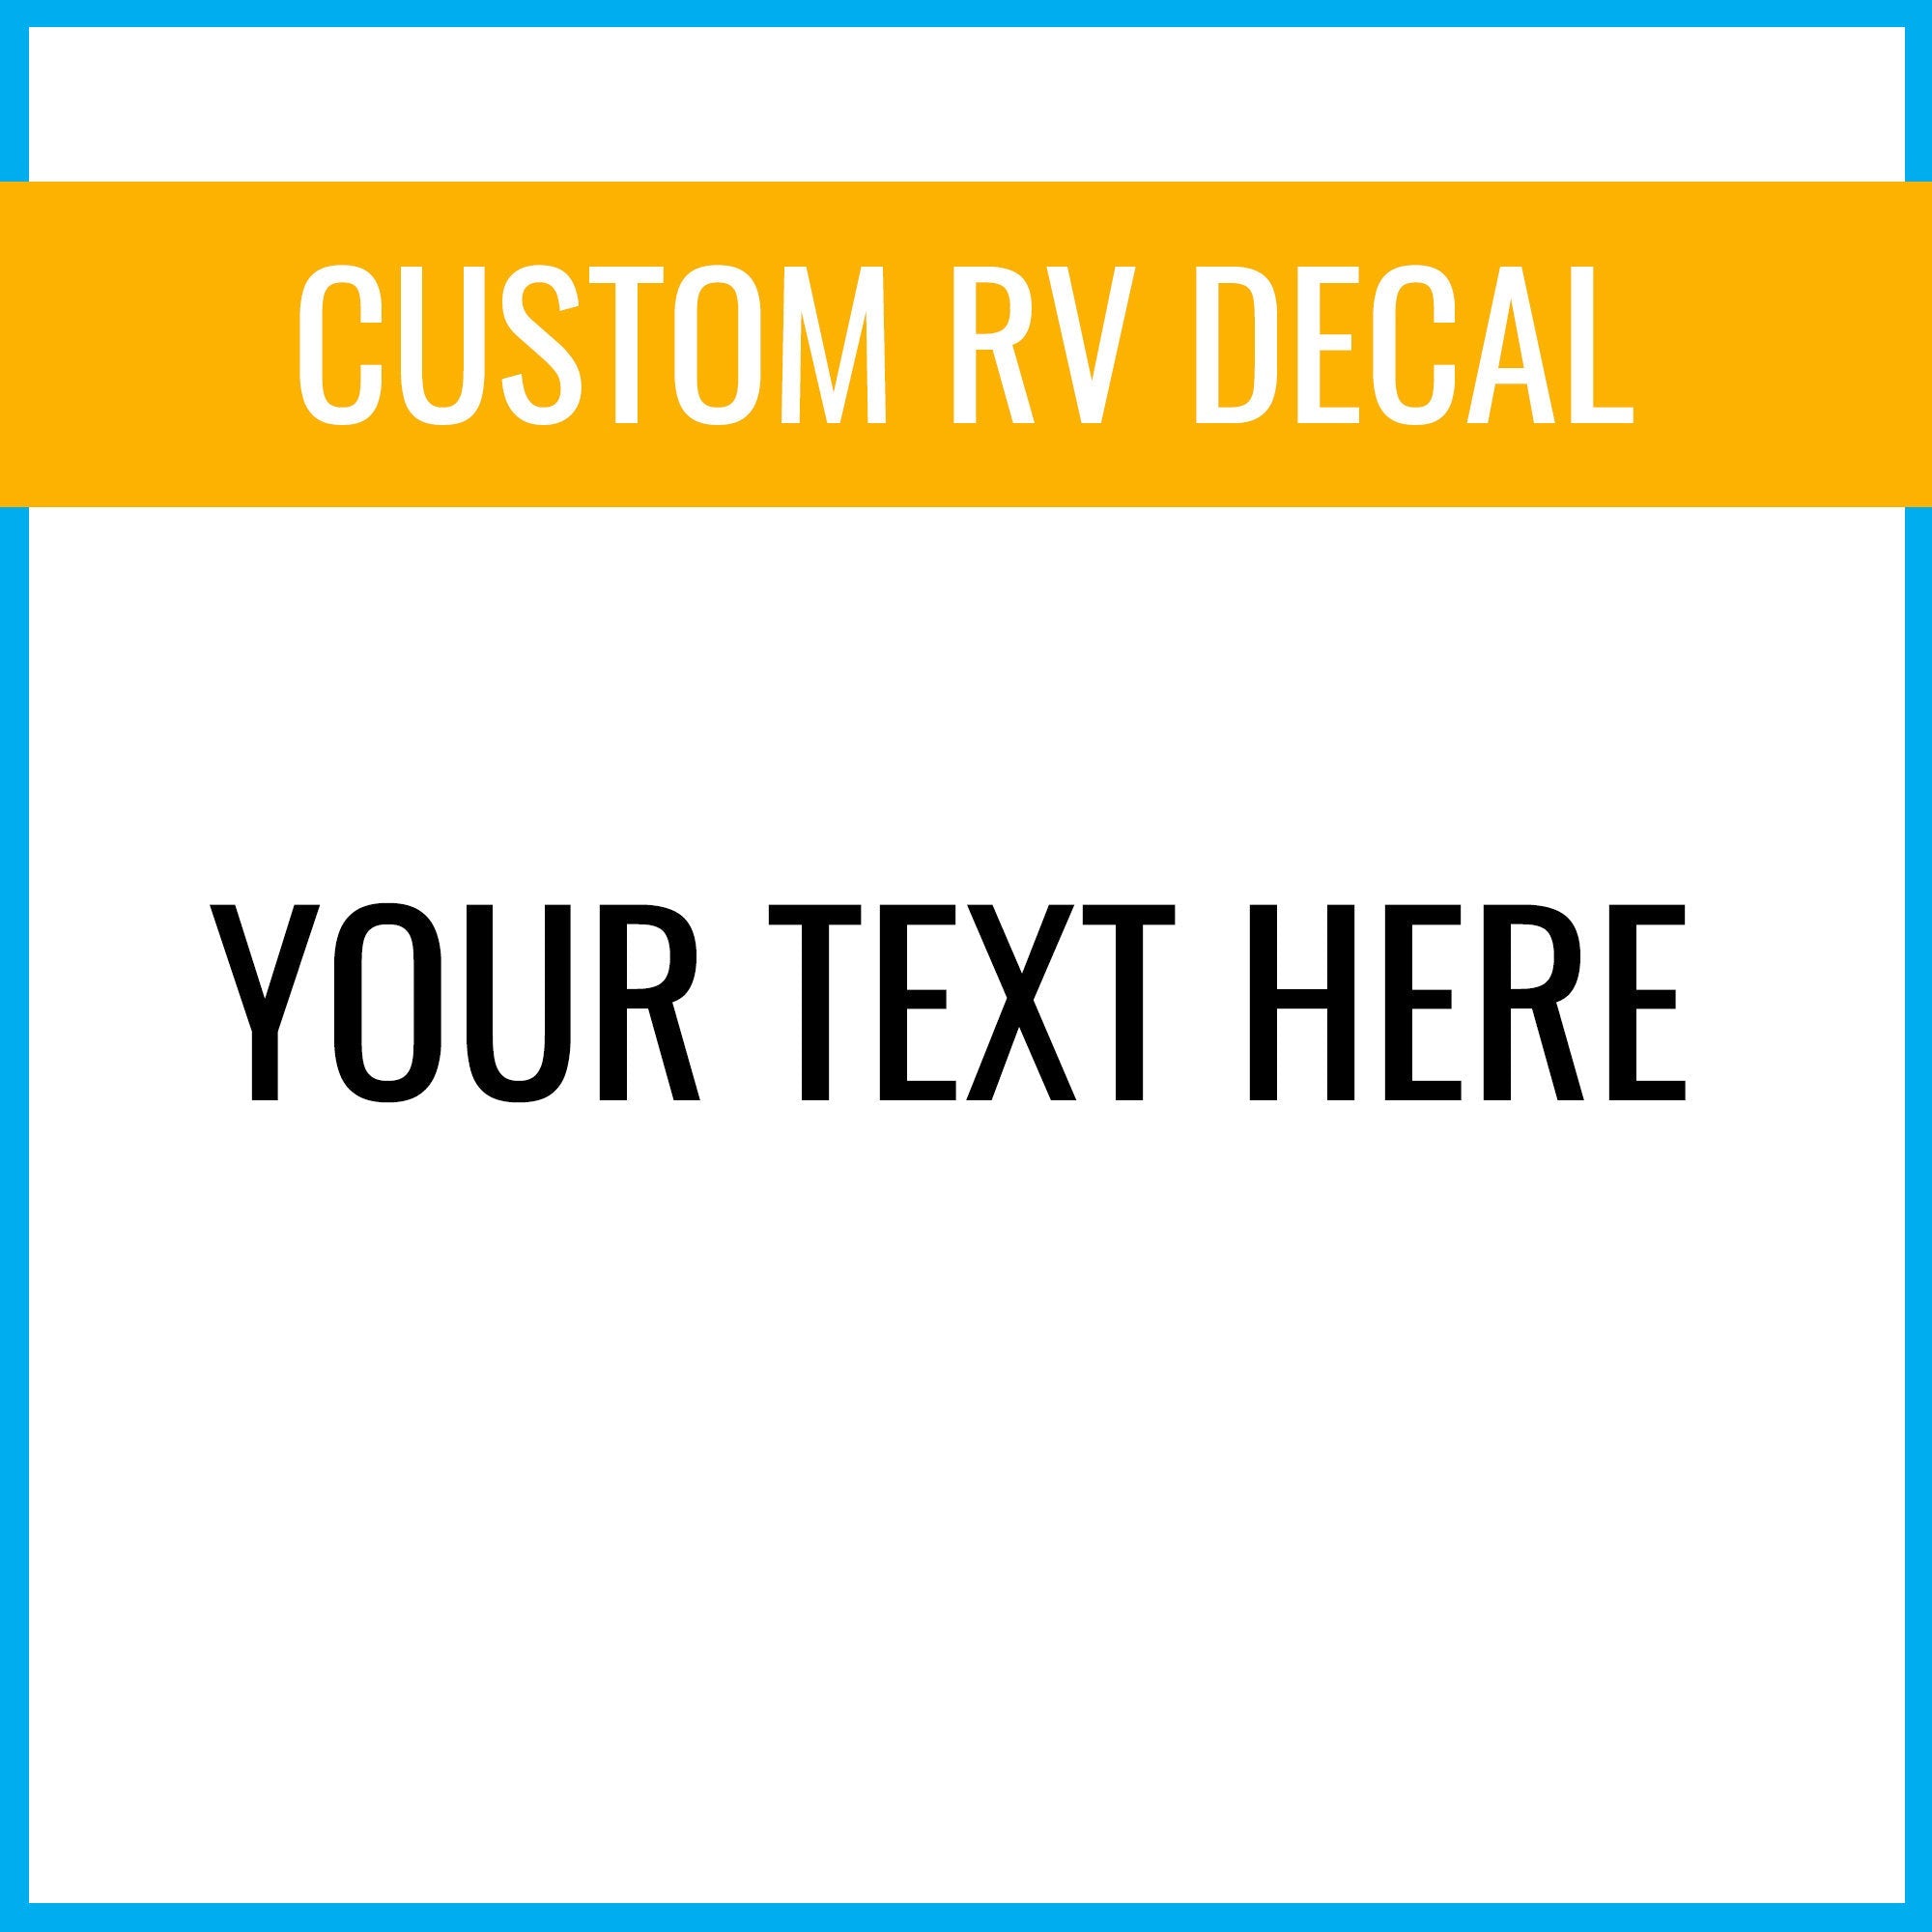 Personalized RV Decal - Permanent Outdoor-Grade Vinyl Lettering for Signs, Transom, Recreational Vehicle, Car, Trailer, and More!